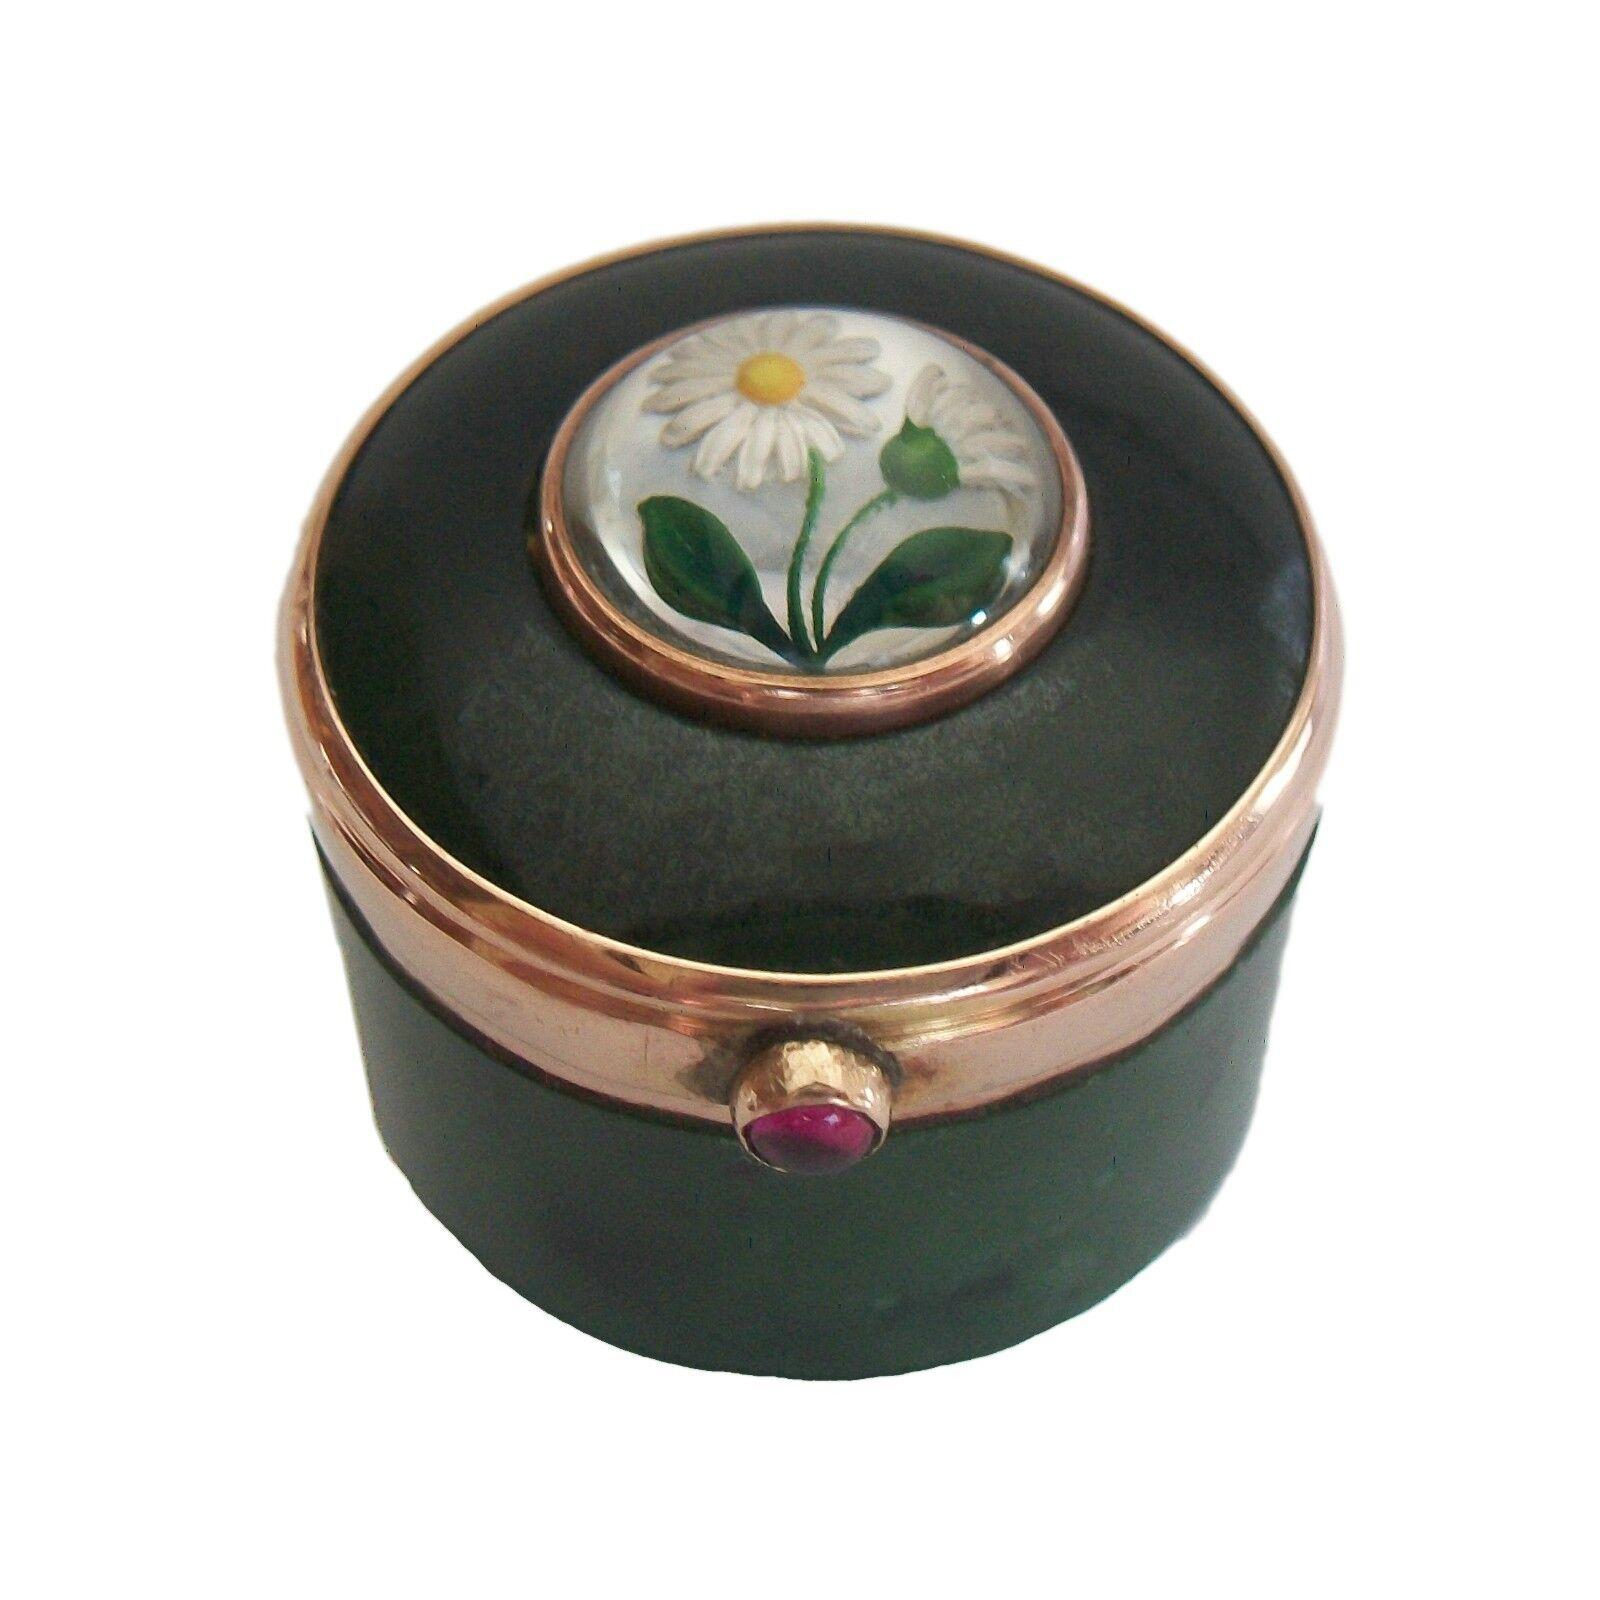 Levi & Salaman - Antique nephrite pill box with floral Essex crystal (rock crystal - reverse carved intaglio) - hand painted and carved daisy in full bloom with mother-of-pearl backing to the crystal - 9K rose gold mounts - cabochon ruby